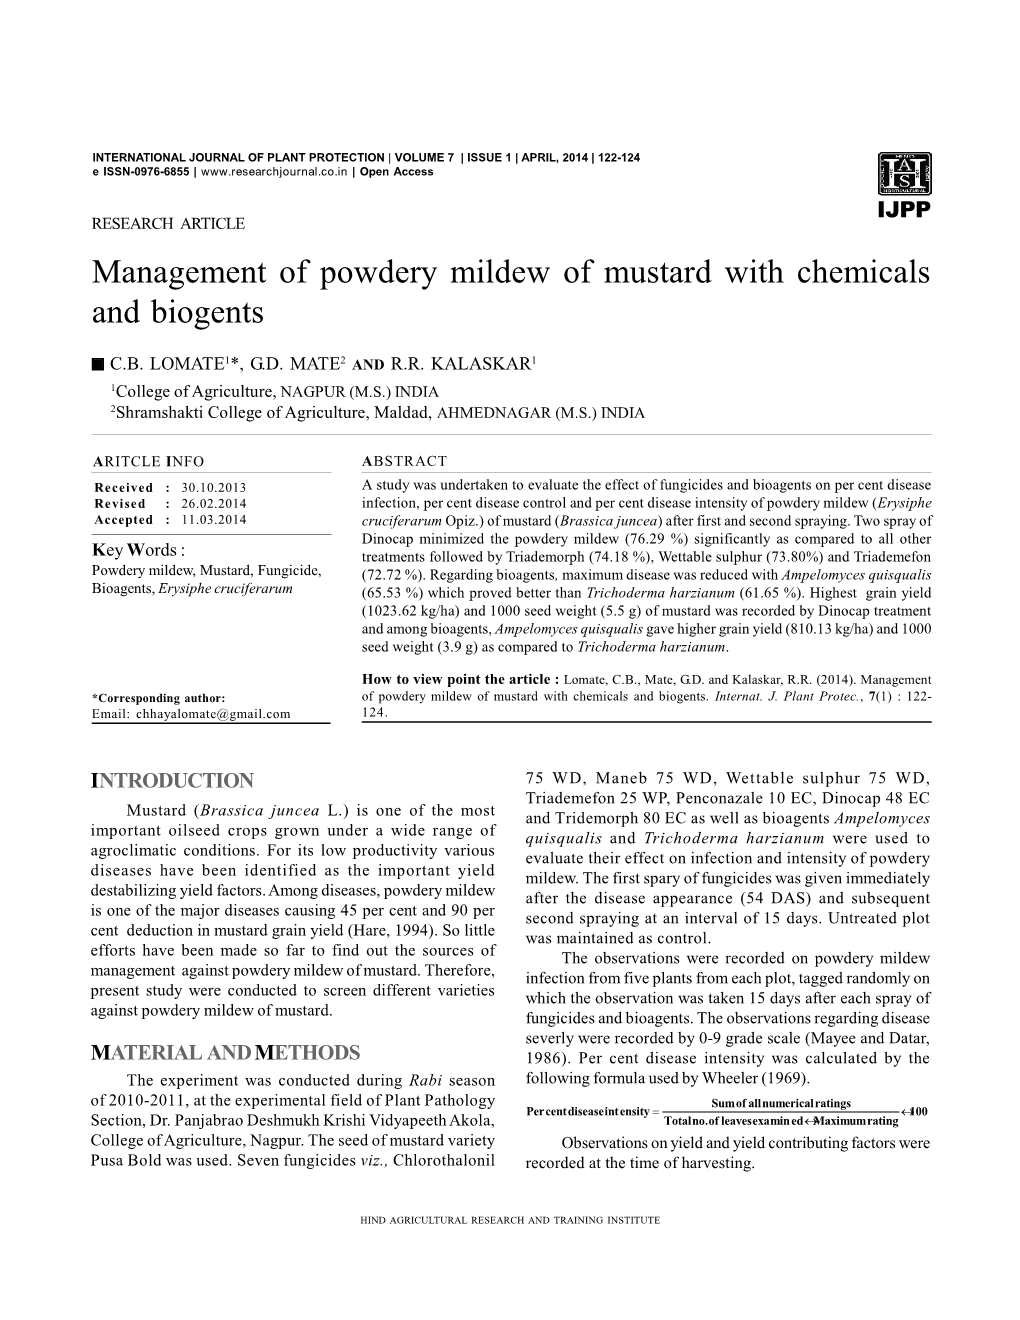 Management of Powdery Mildew of Mustard with Chemicals and Biogents